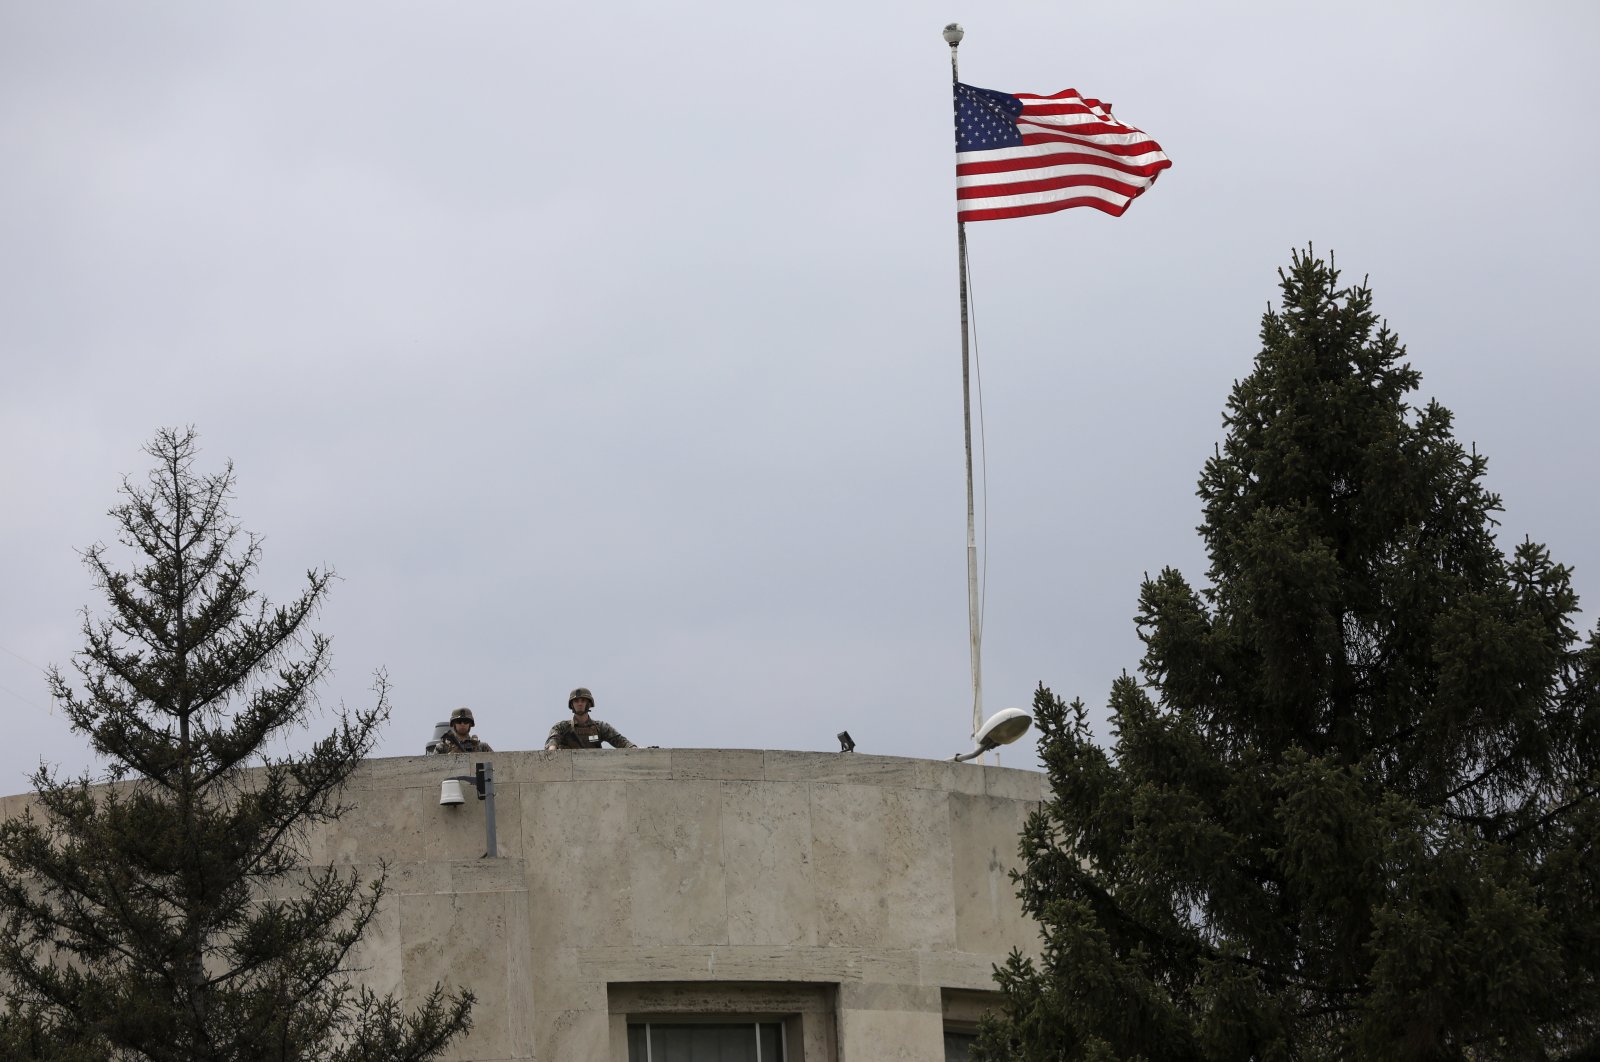 U.S. soldiers stand guard on the rooftop of the U.S. Embassy as Turks stage a protest nearby in Ankara, Turkey, April 26, 2021. (AP Photo)